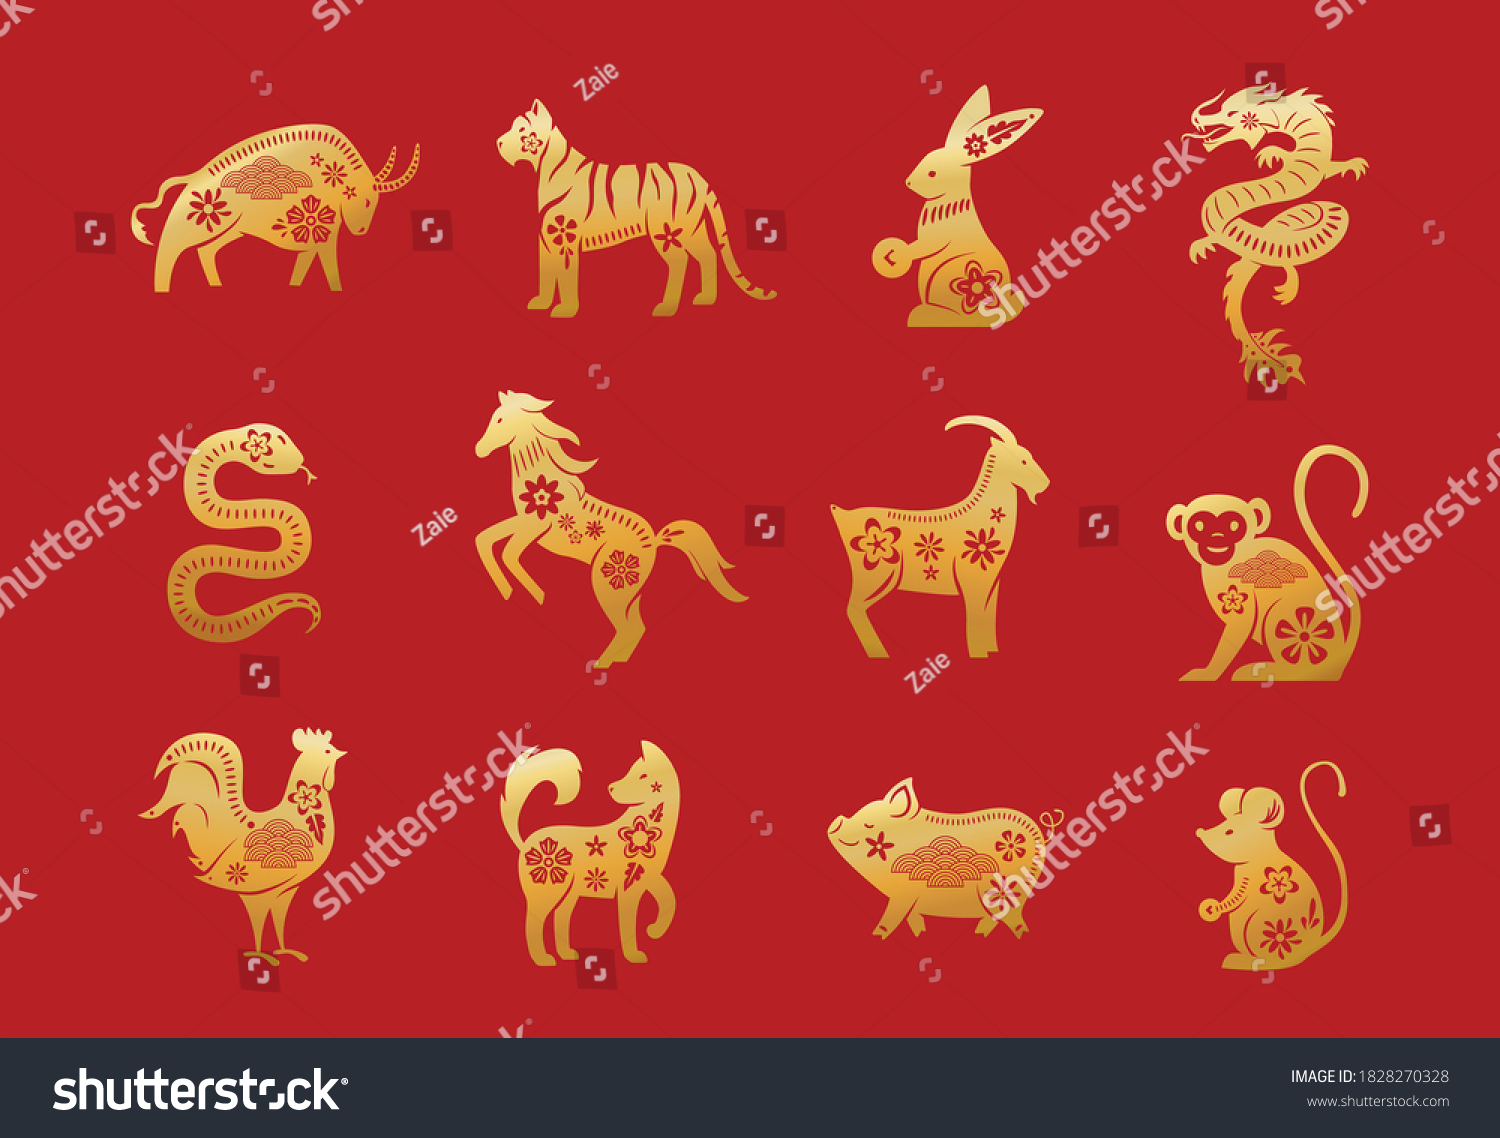 SVG of Chinese zodiac animals. Twelve asian new year golden characters set isolated on red background. Vector illustration of astrology calendar horoscope symbols. svg